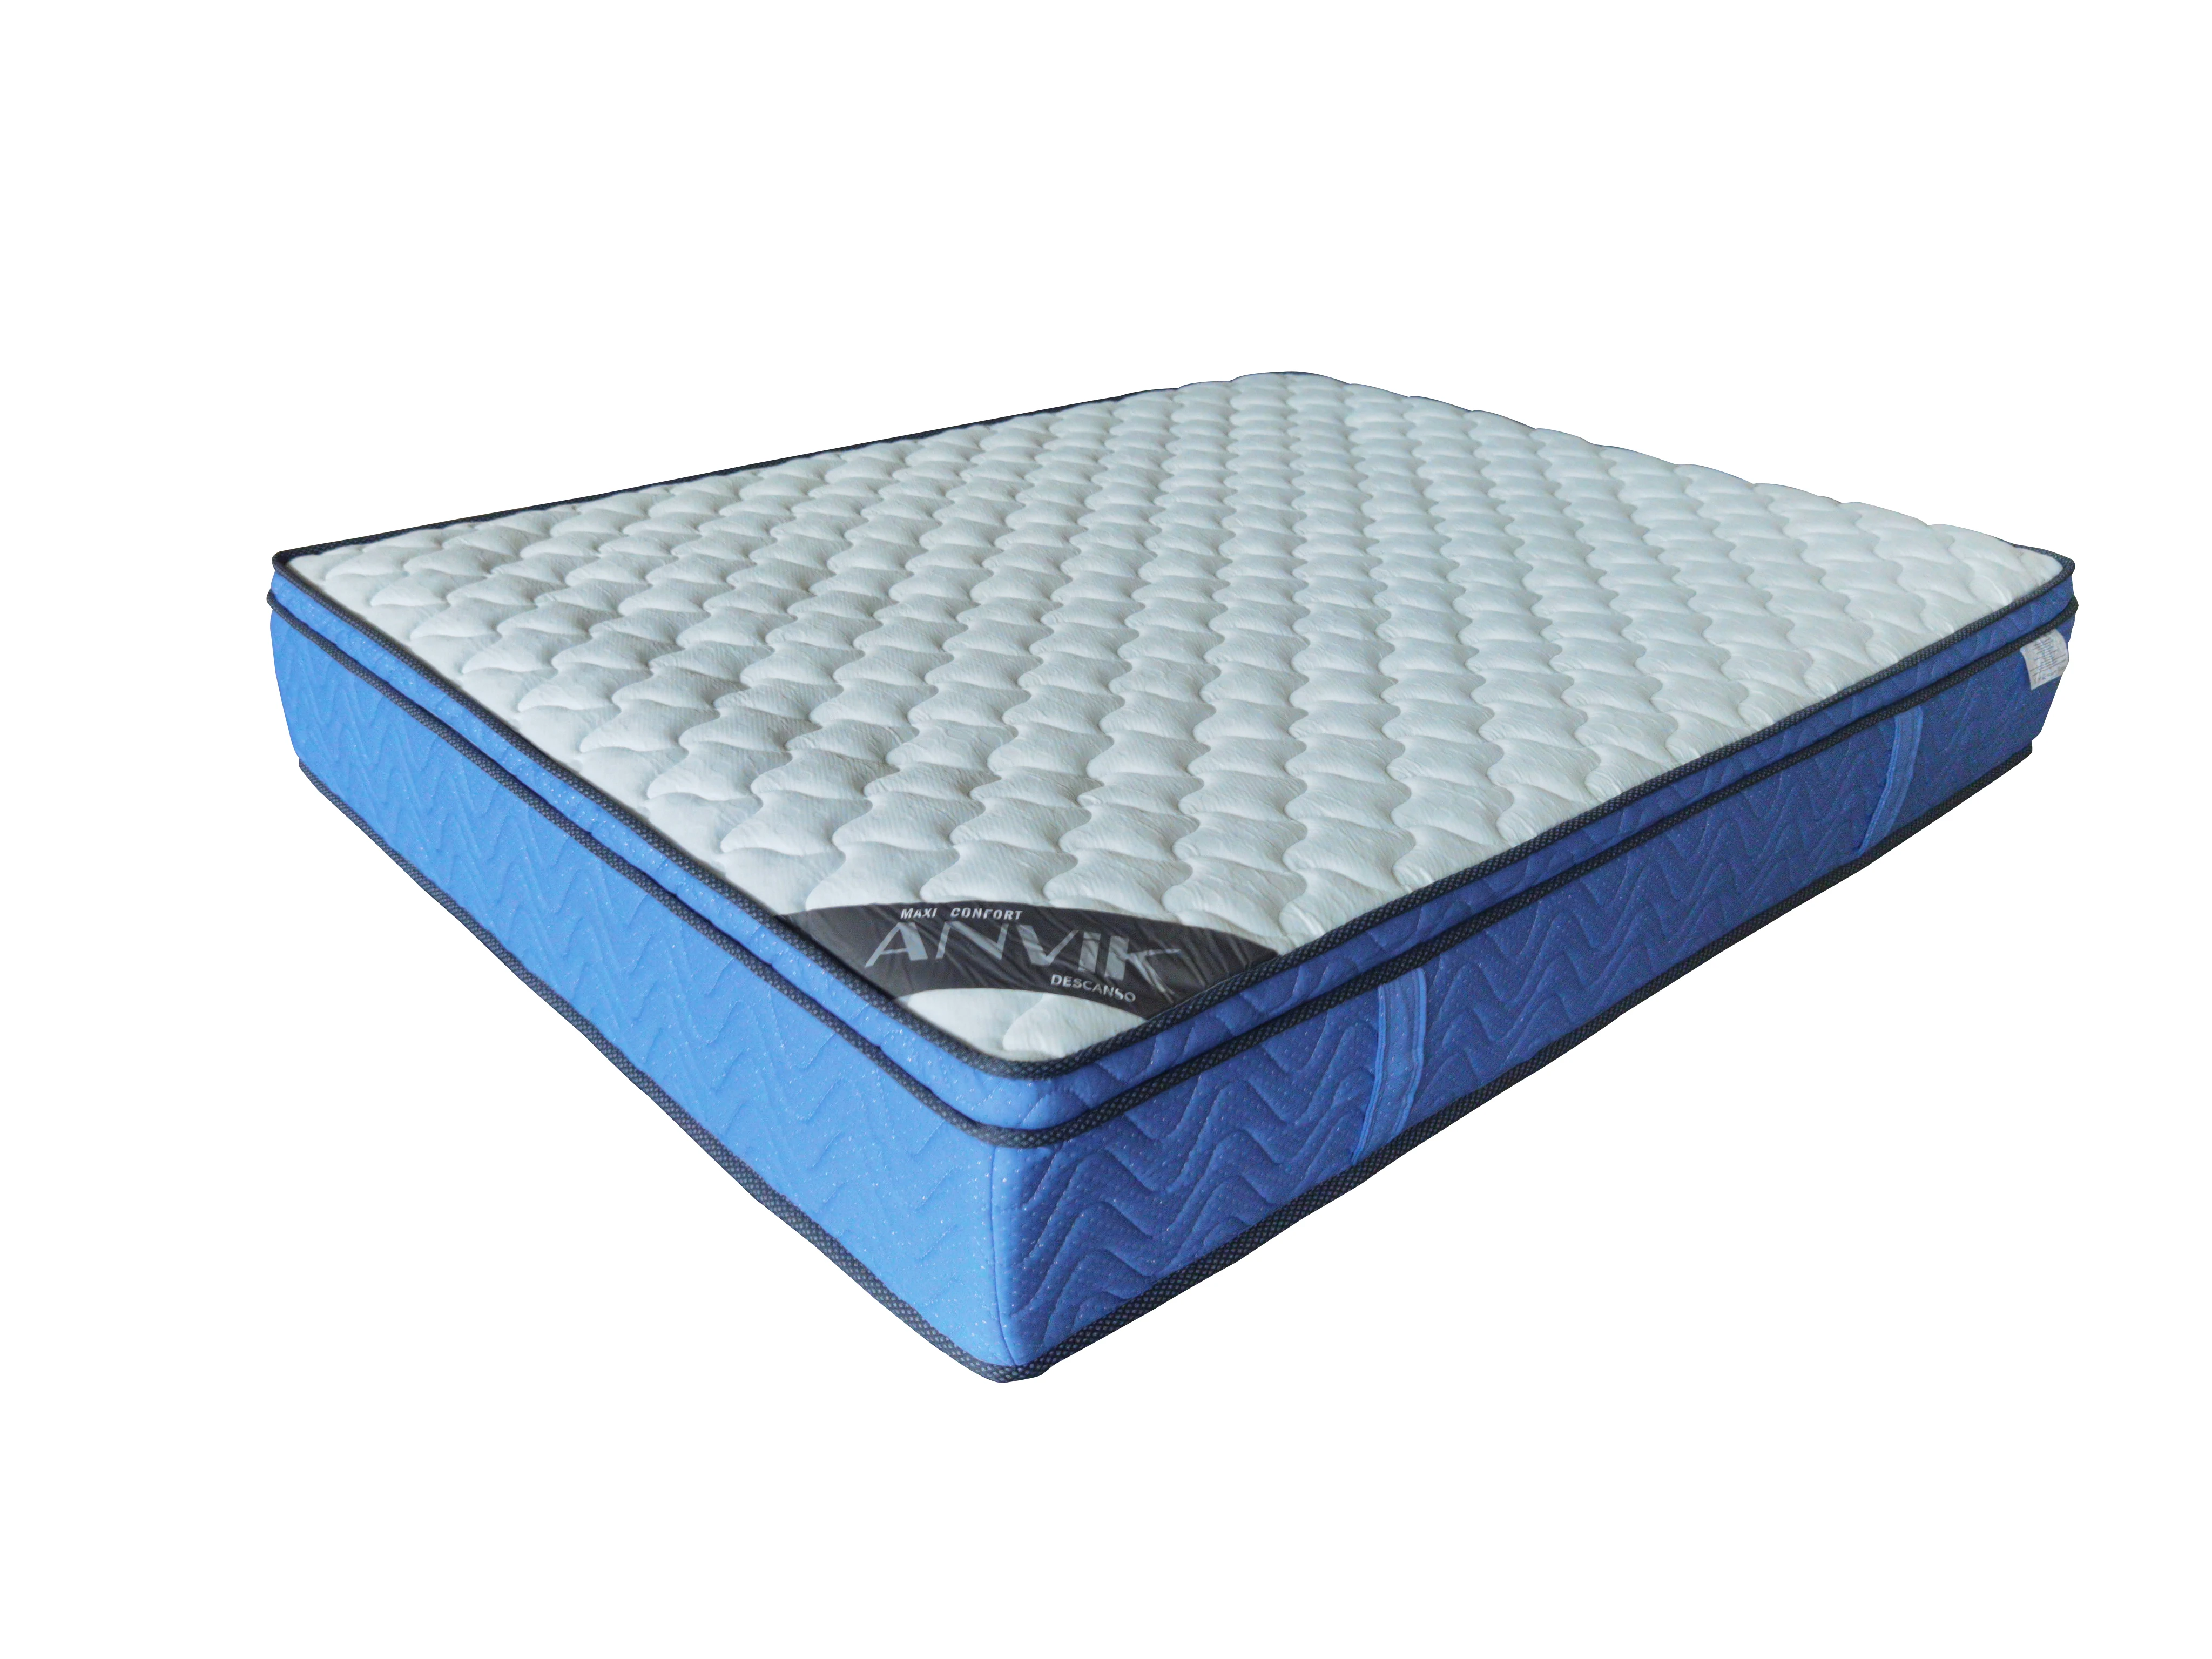 Spain sleep well mattress Double size encased foam  independent pocket spring support Firm foam